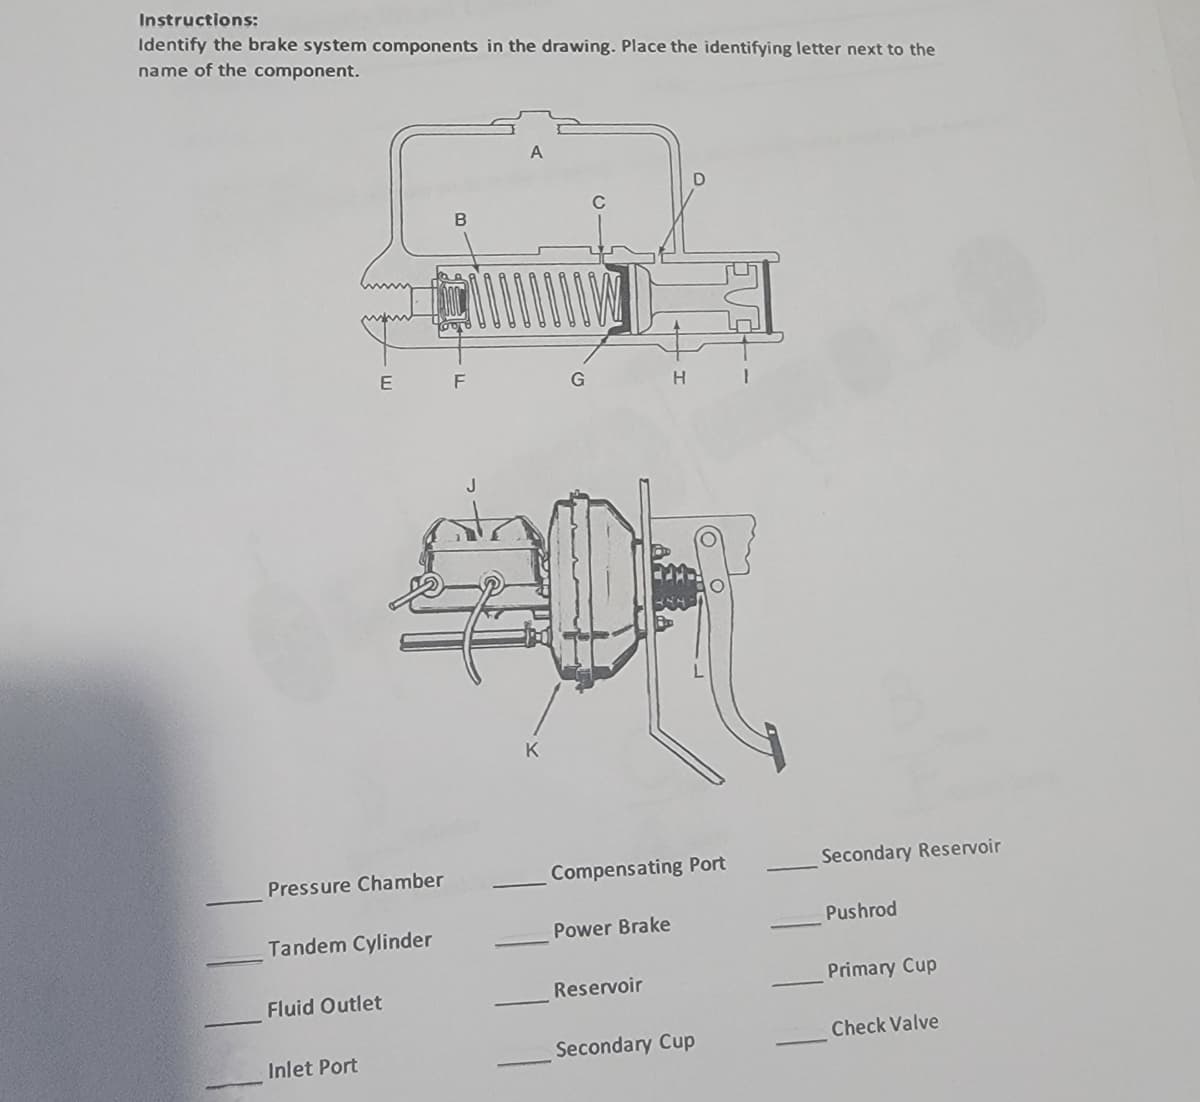 Instructions:
Identify the brake system components in the drawing. Place the identifying letter next to the
name of the component.
C
F
H.
K
Pressure Chamber
Compensating Port
Secondary Reservoir
Pushrod
Tandem Cylinder
Power Brake
Reservoir
Primary Cup
Fluid Outlet
Check Valve
Inlet Port
Secondary Cup
